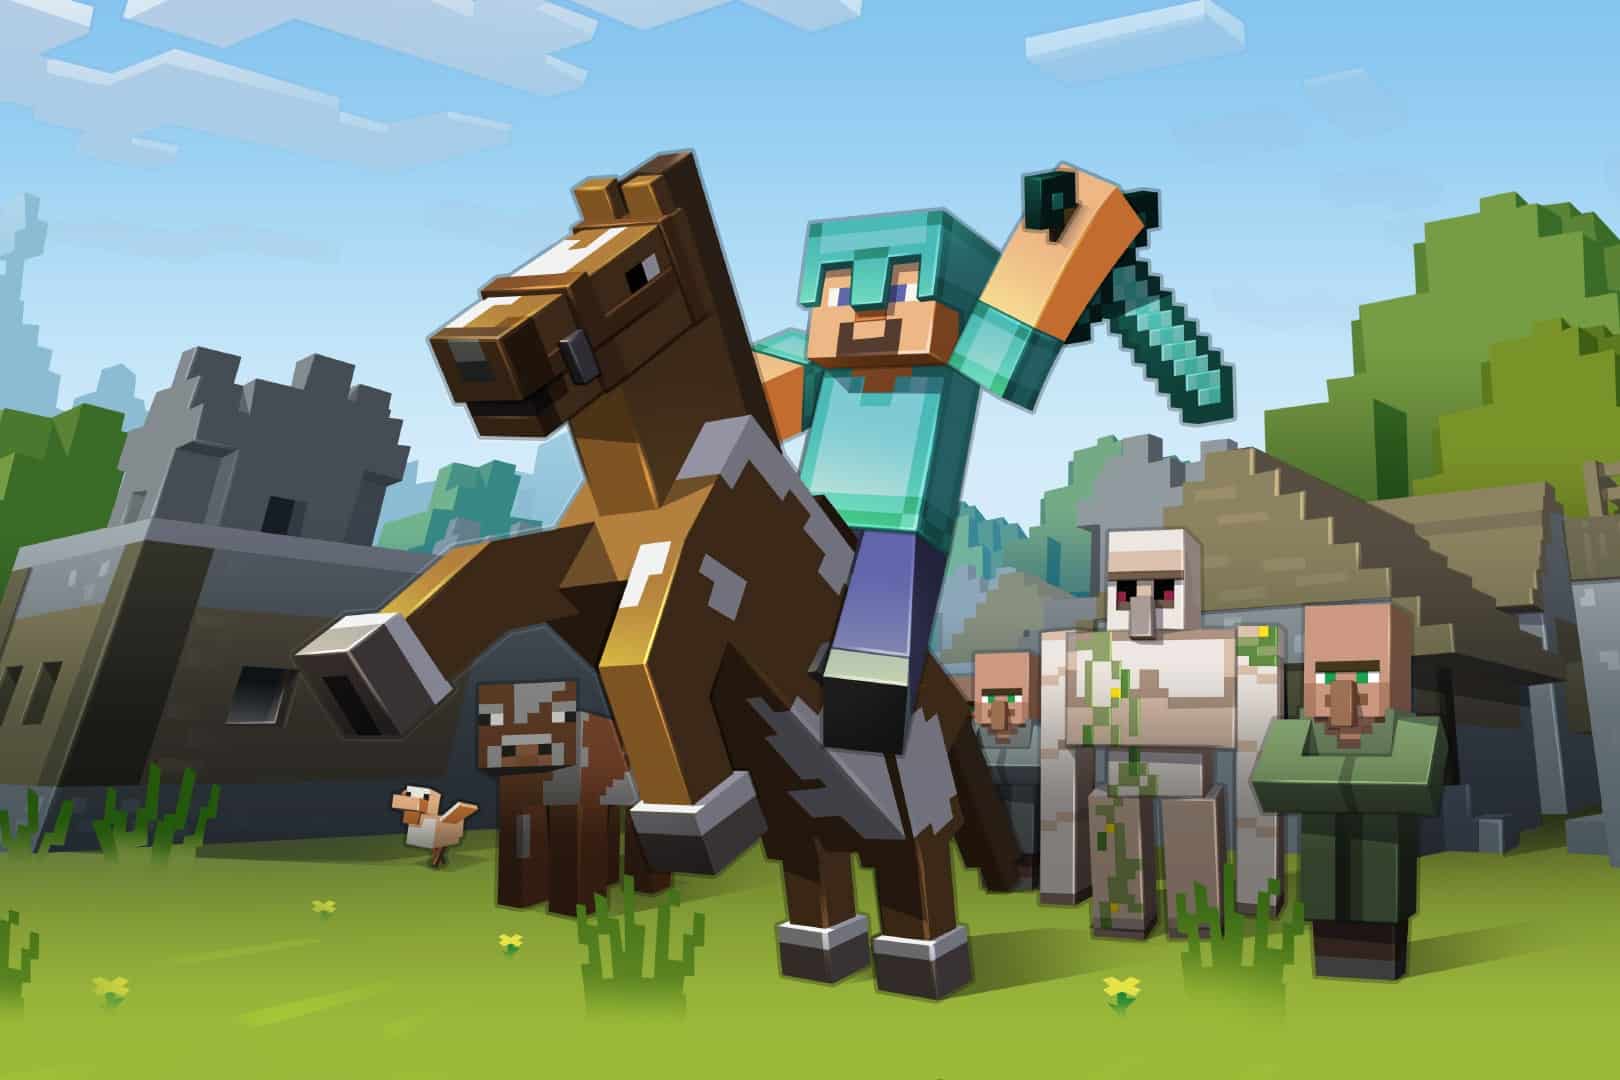 No NFTs in Minecraft? This Crypto Group Will Make Its Own Game | WIRED